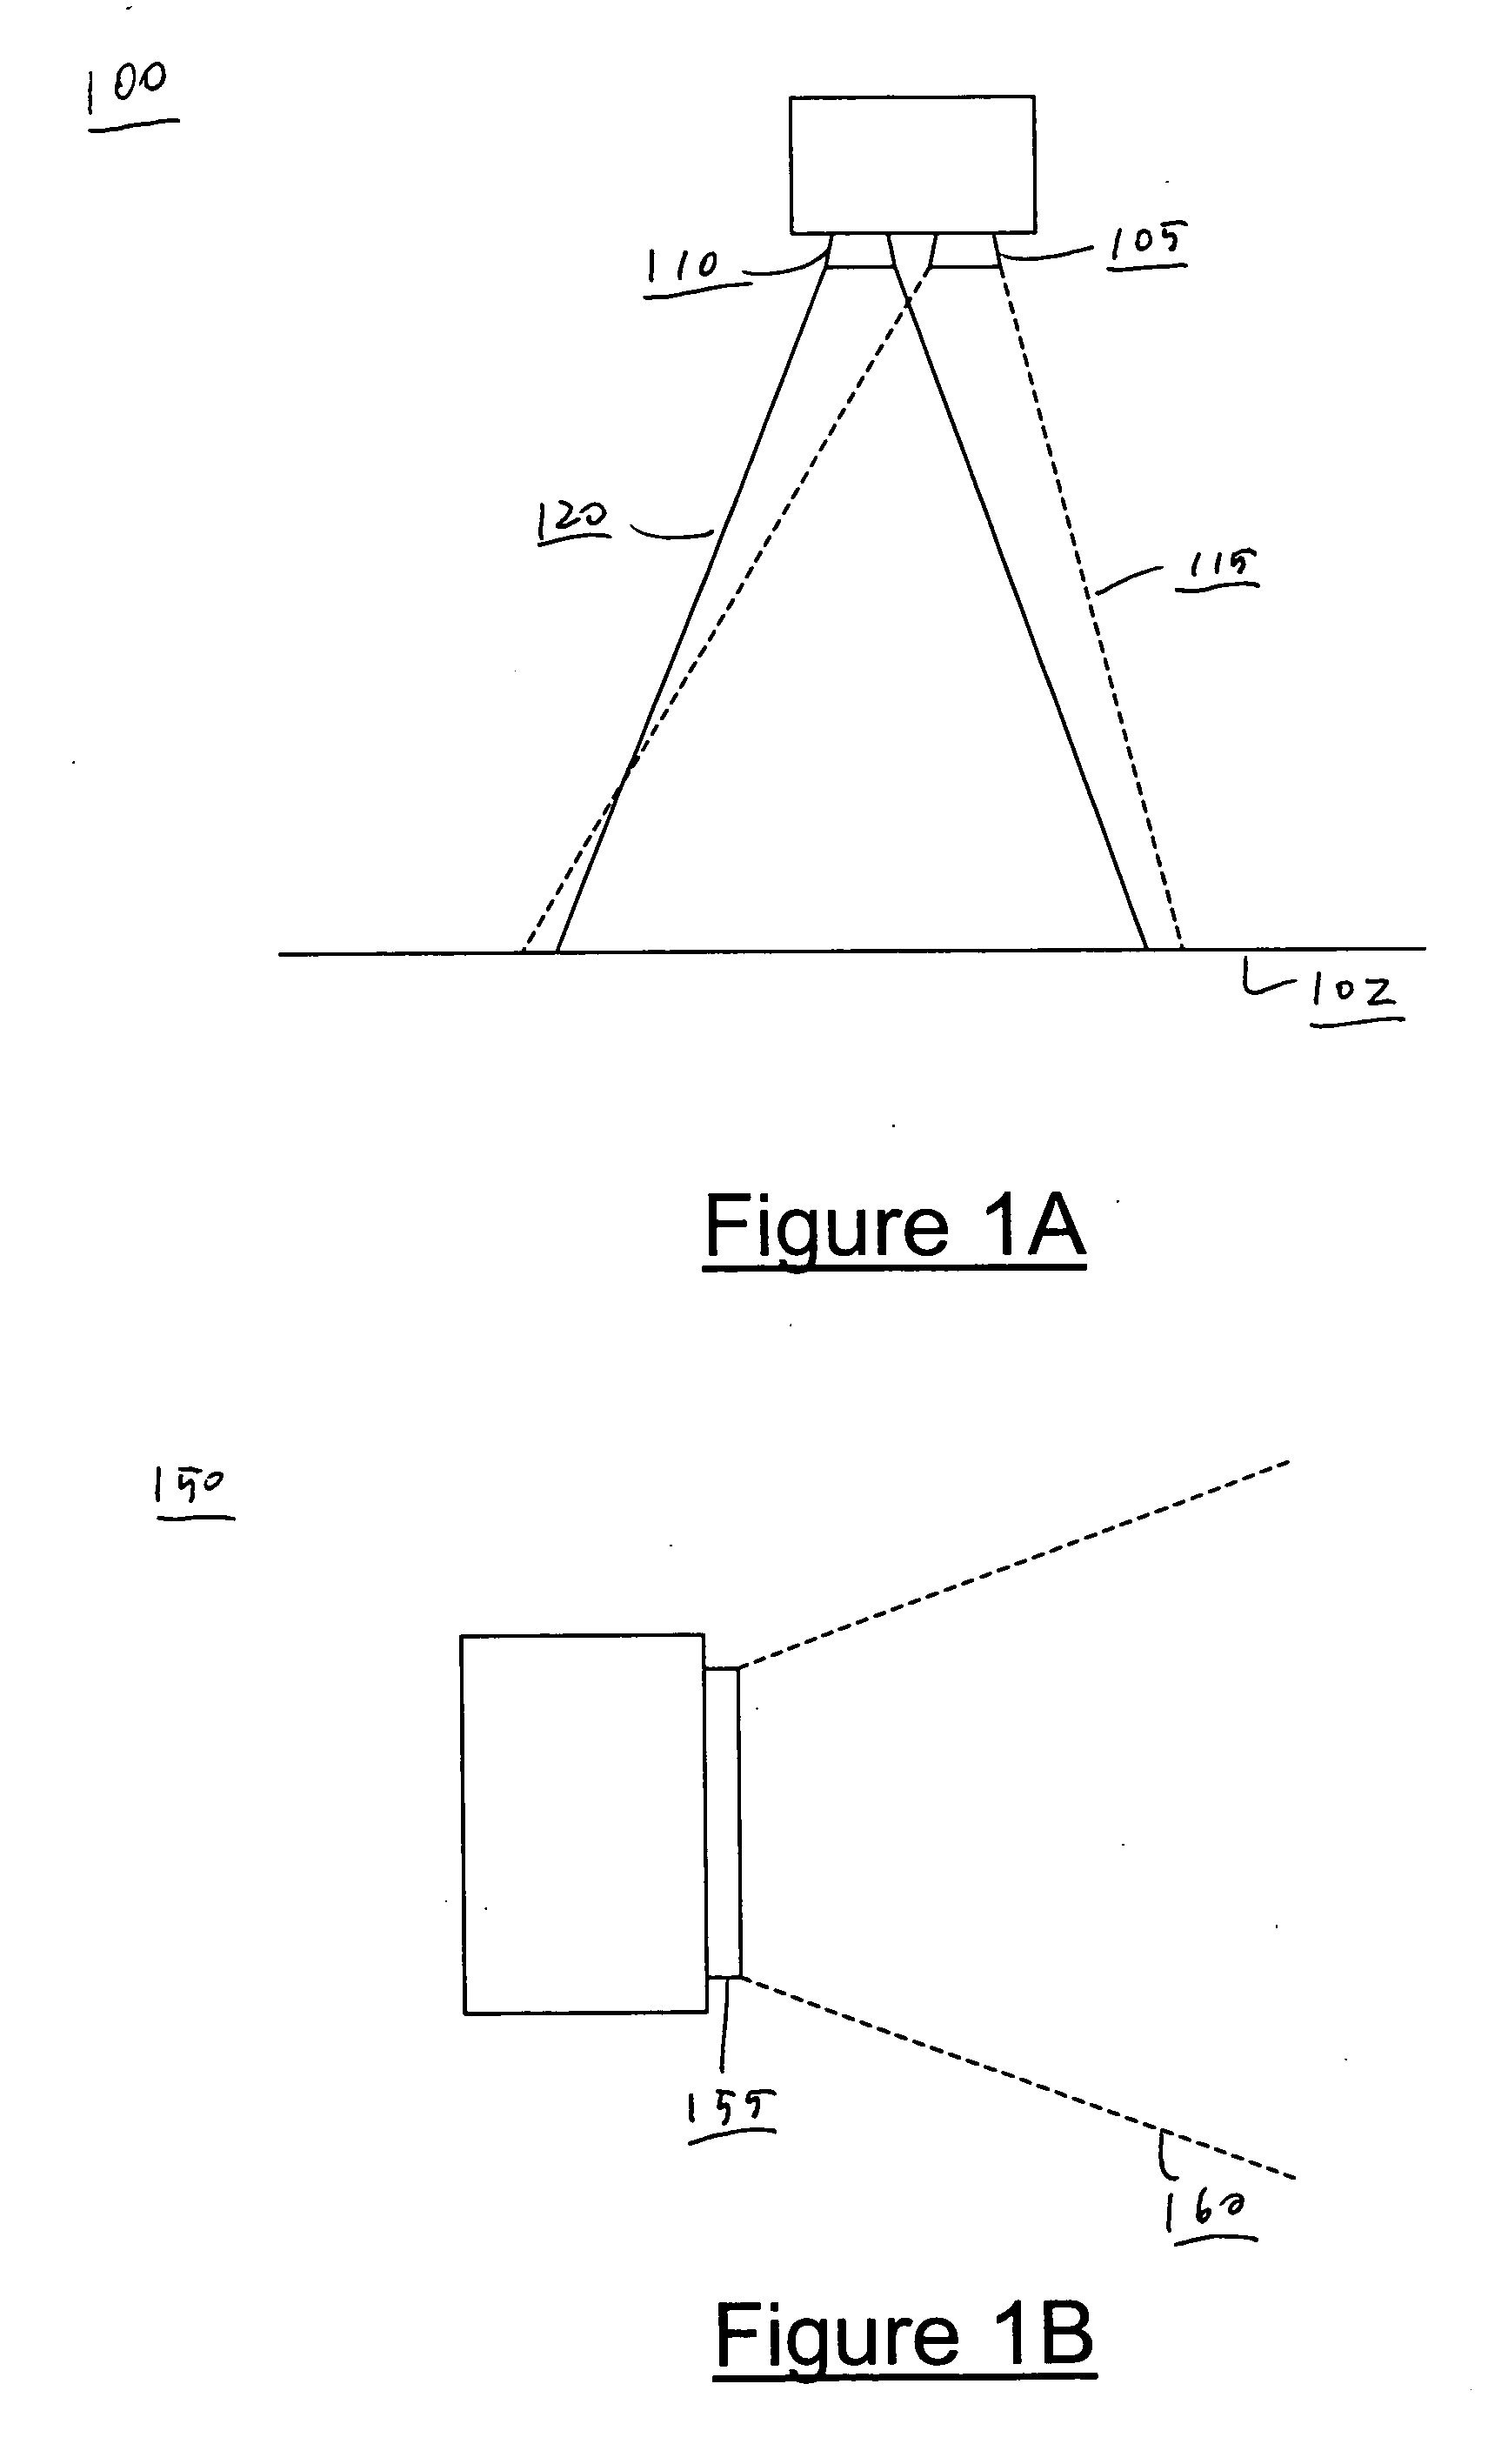 Method and system for processing captured image information in an interactive video display system